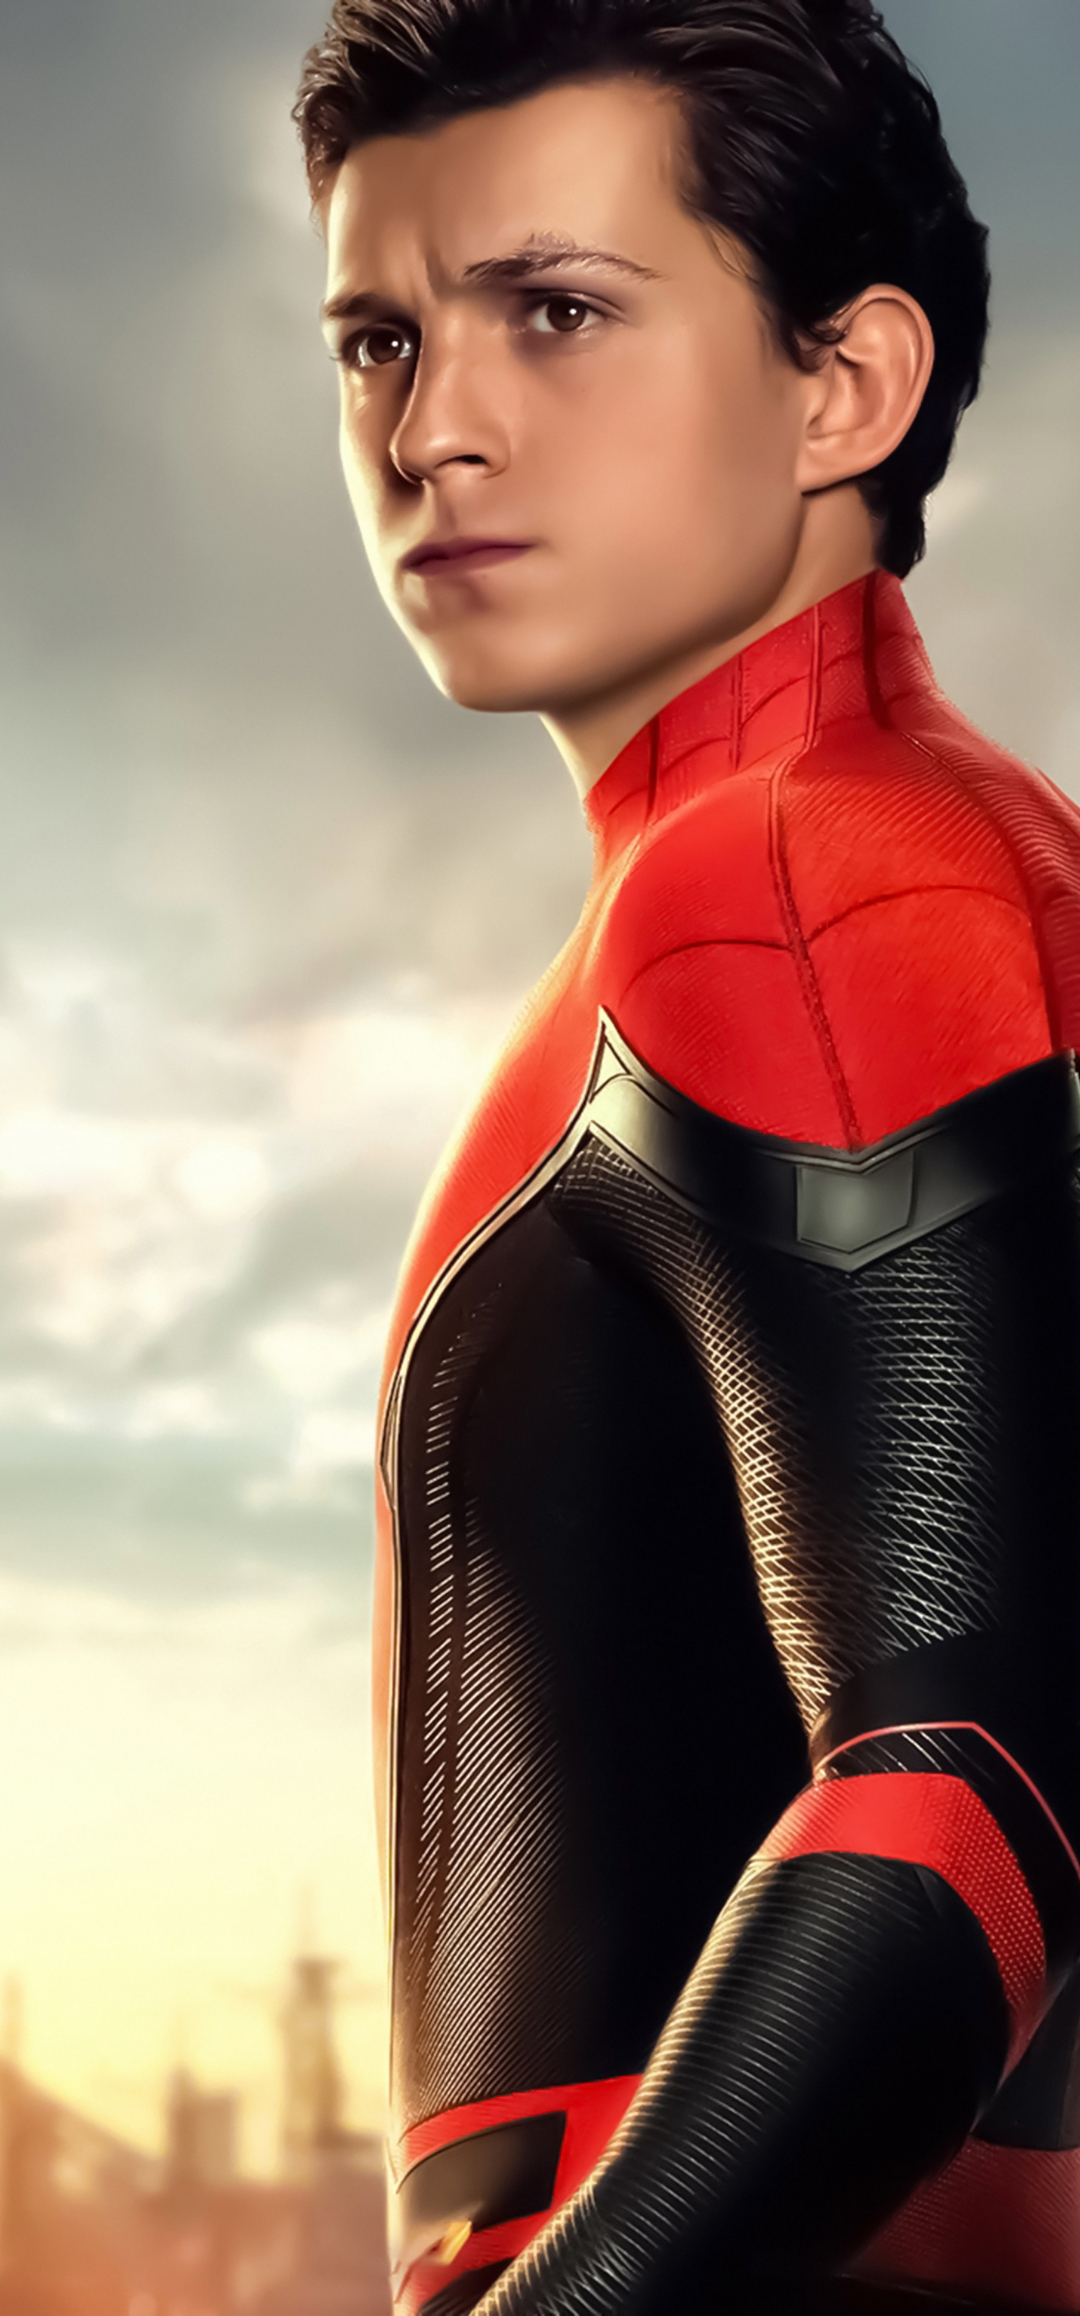 Is Tom Holland In The New Spiderman Movie 1080x2316 Tom Holland Spider Man Far From Home Poster 1080x2316